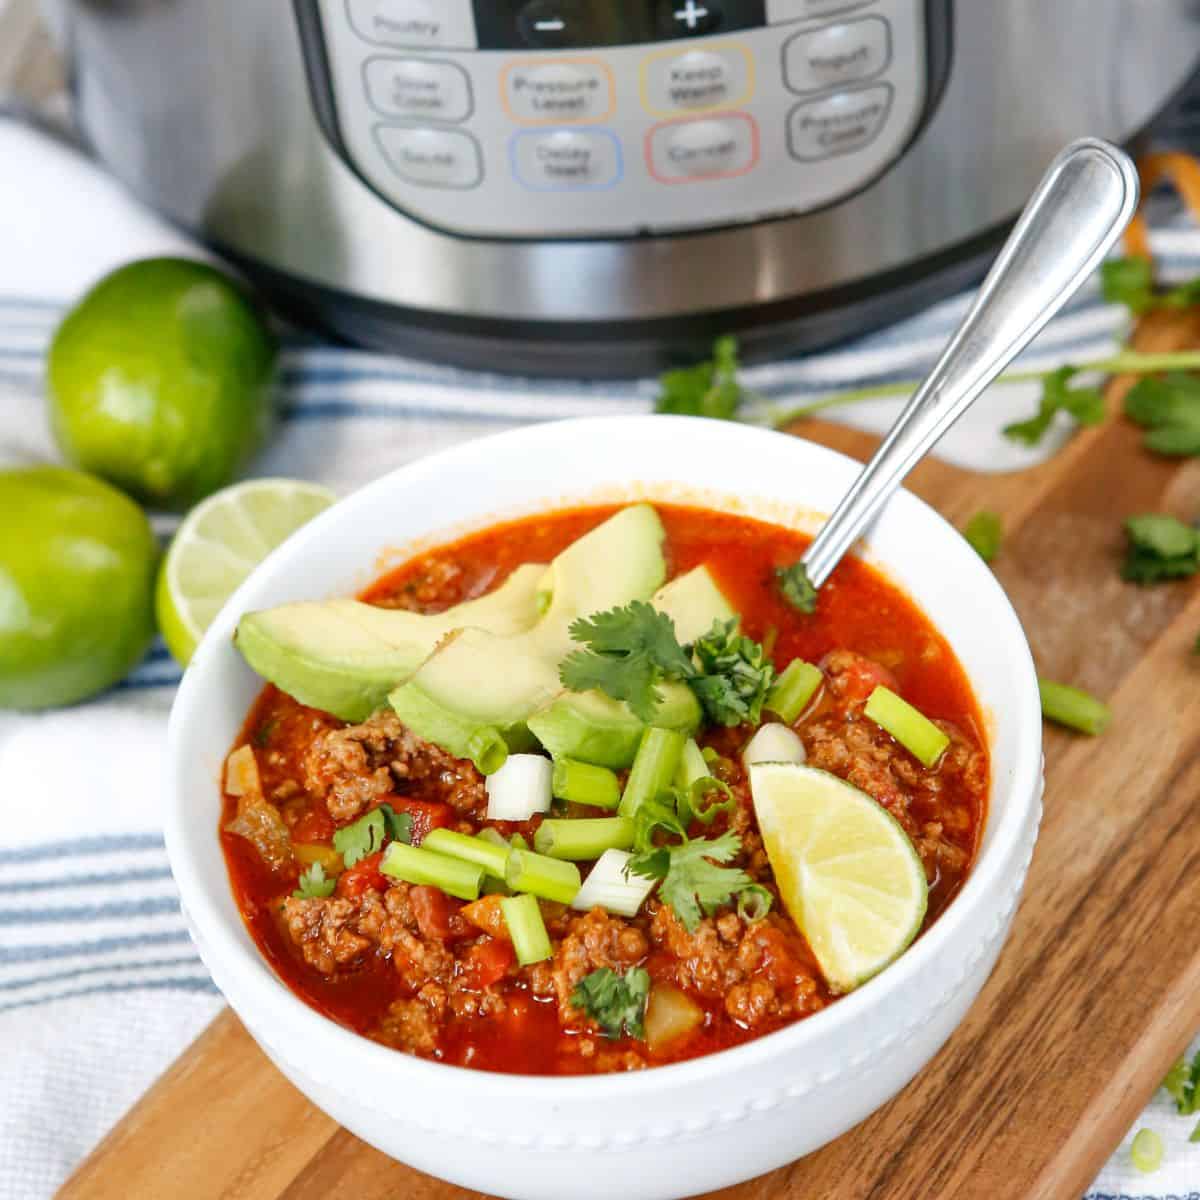 A chili recipe showcased next to an instant pot.